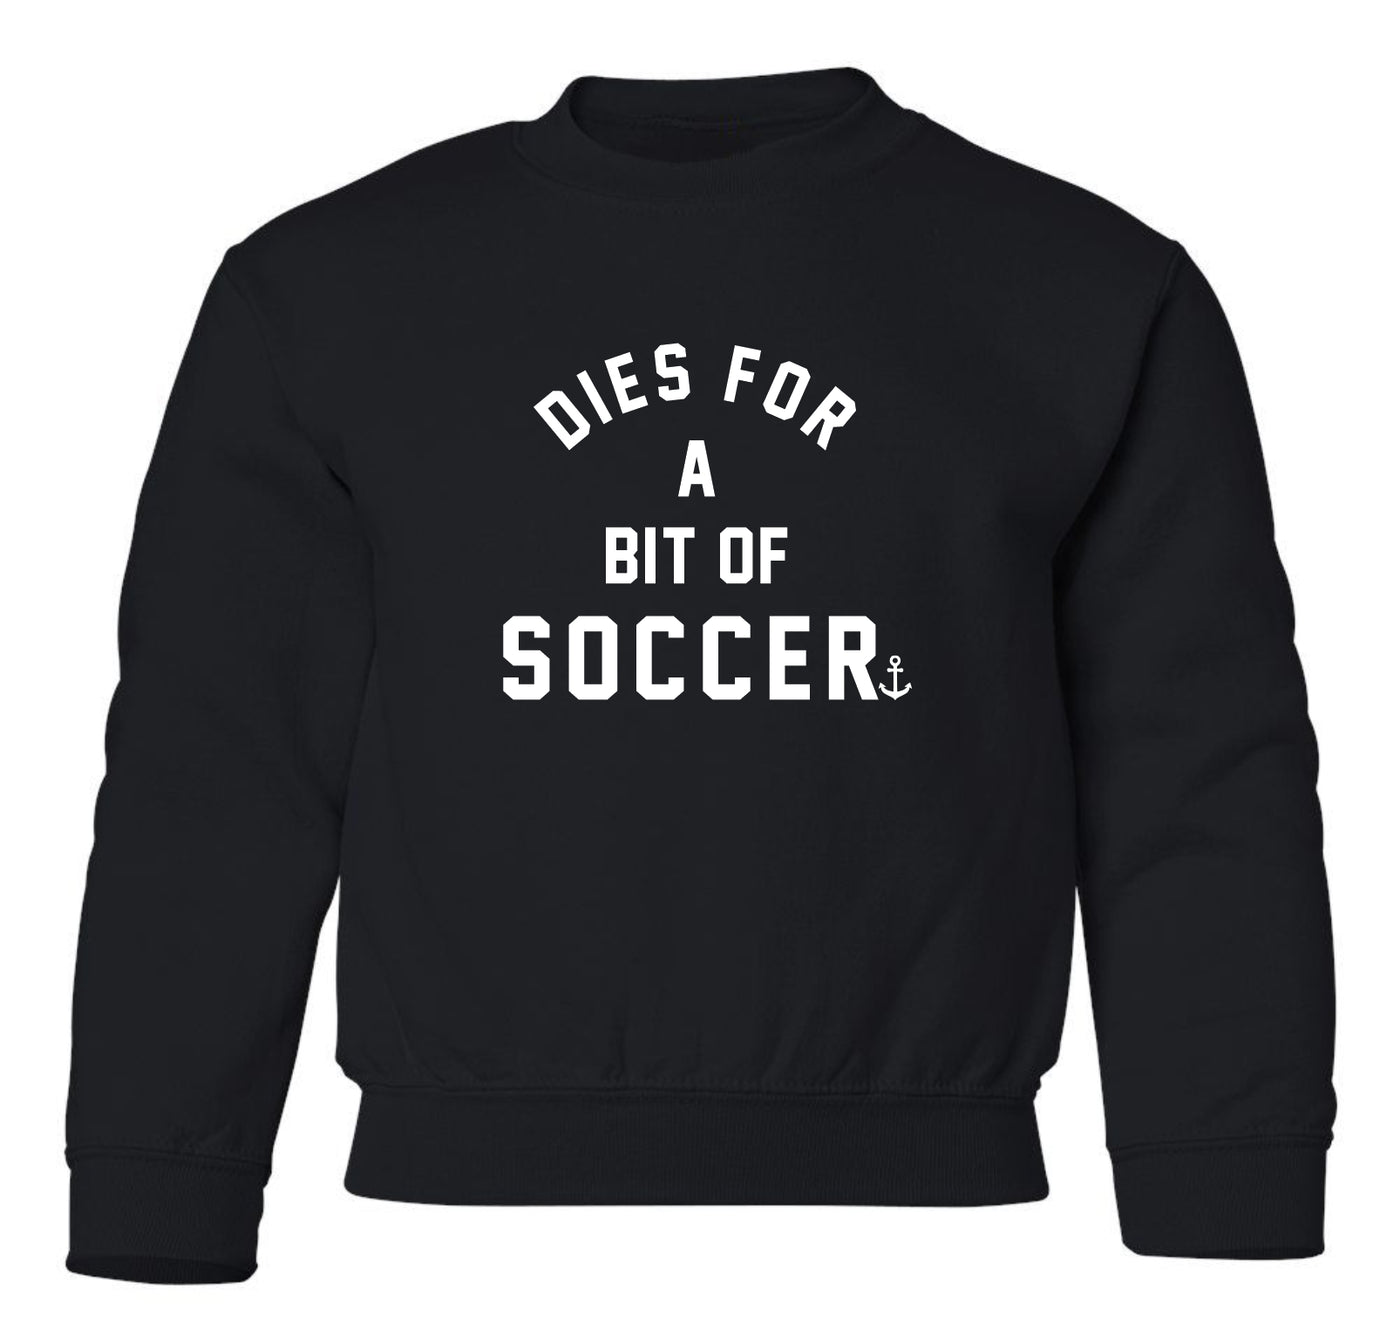 "Dies For A Bit Of Soccer" Toddler/Youth Crewneck Sweatshirt